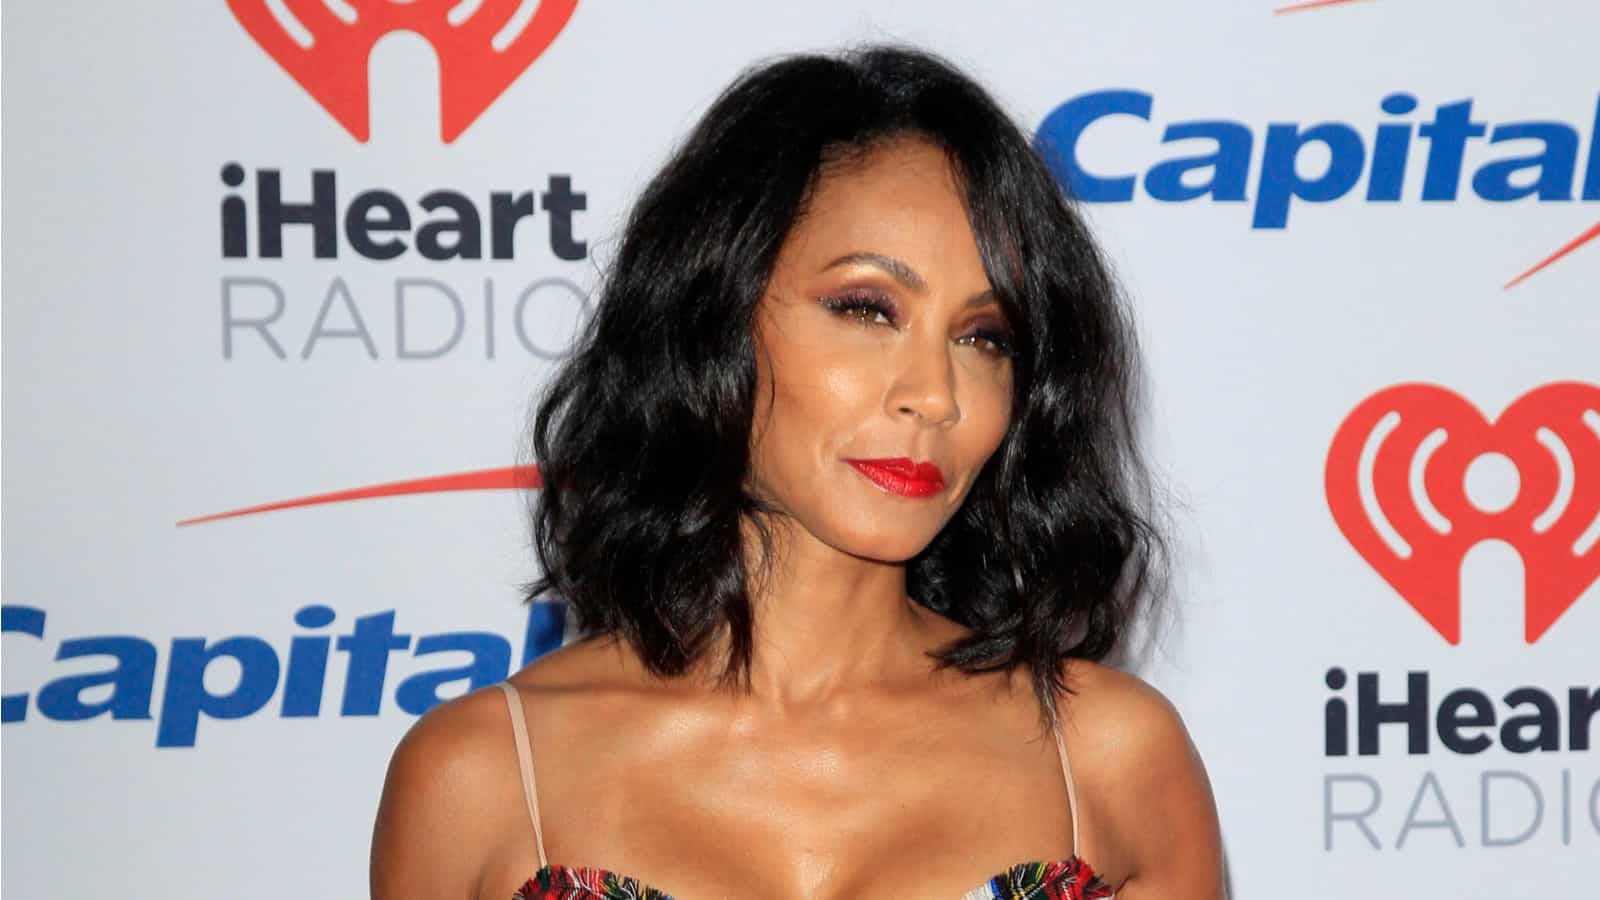 Jada Pinkett Smith Opens About Dad S Addiction On Red Table Talk